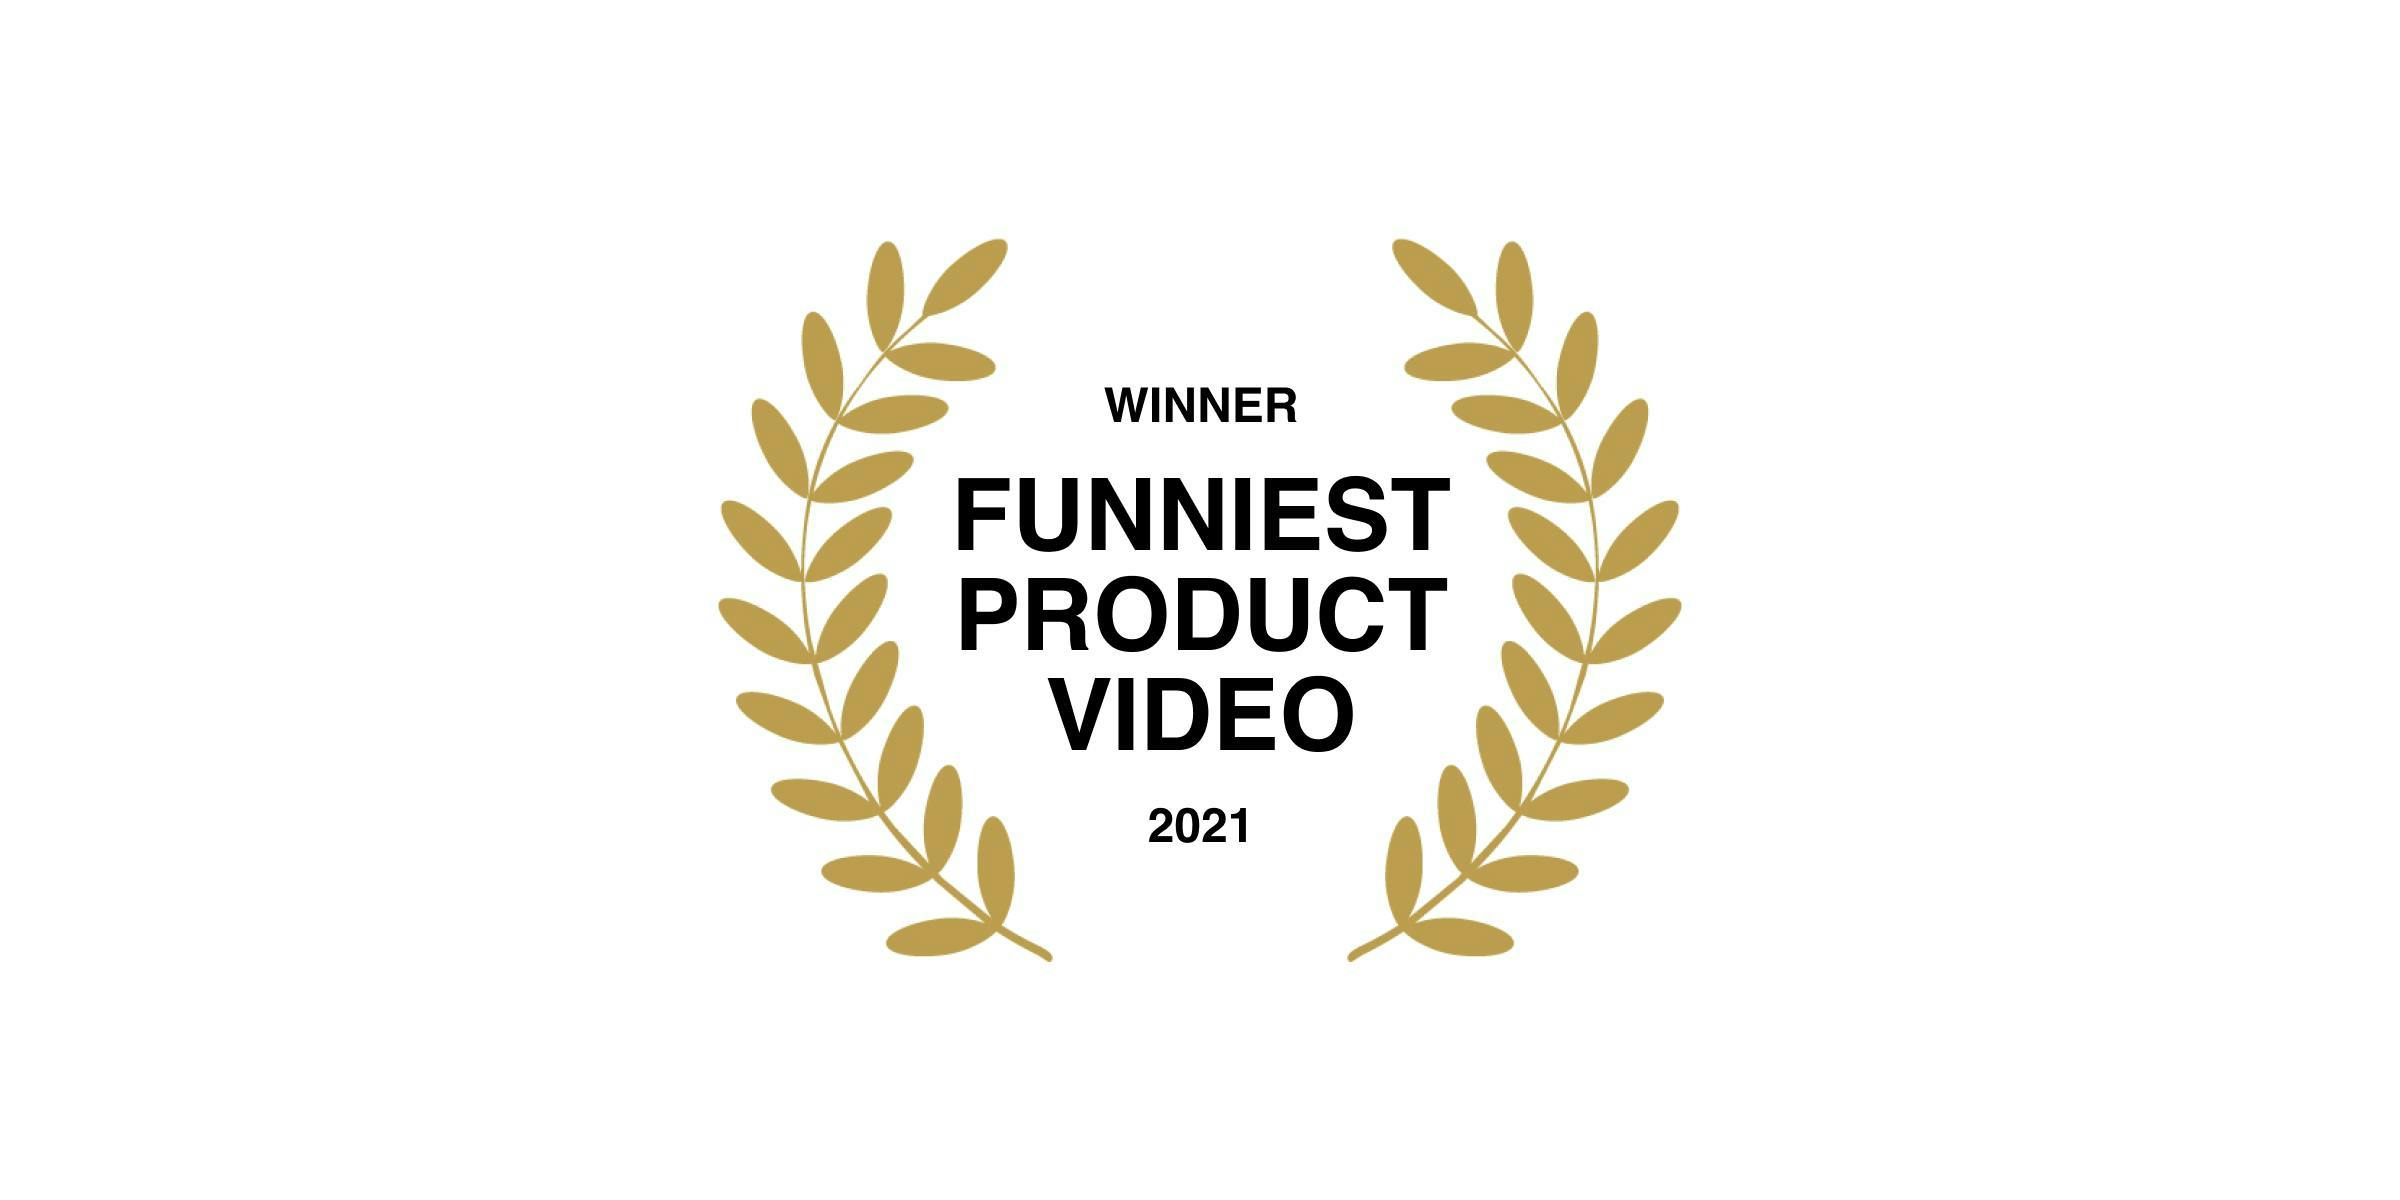 Funniest Product Video 2021